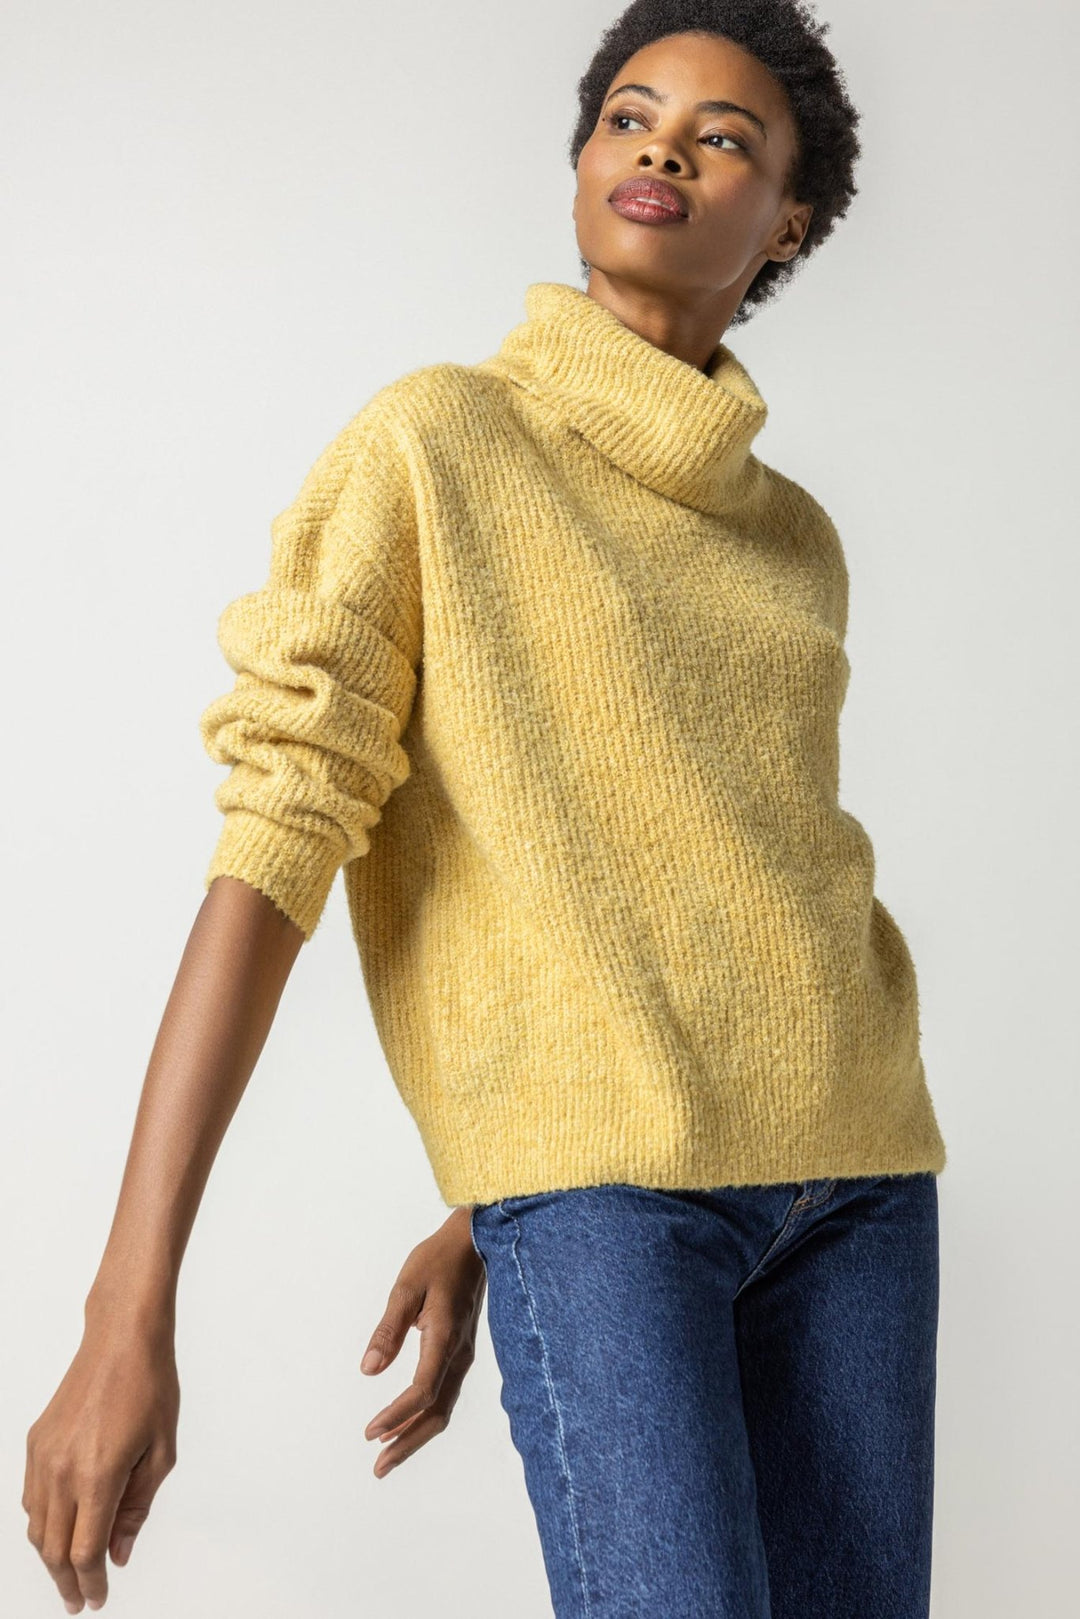 Lilla P - Oversized Ribbed Turtleneck Sweater: Gold Dust - Shorely Chic Boutique